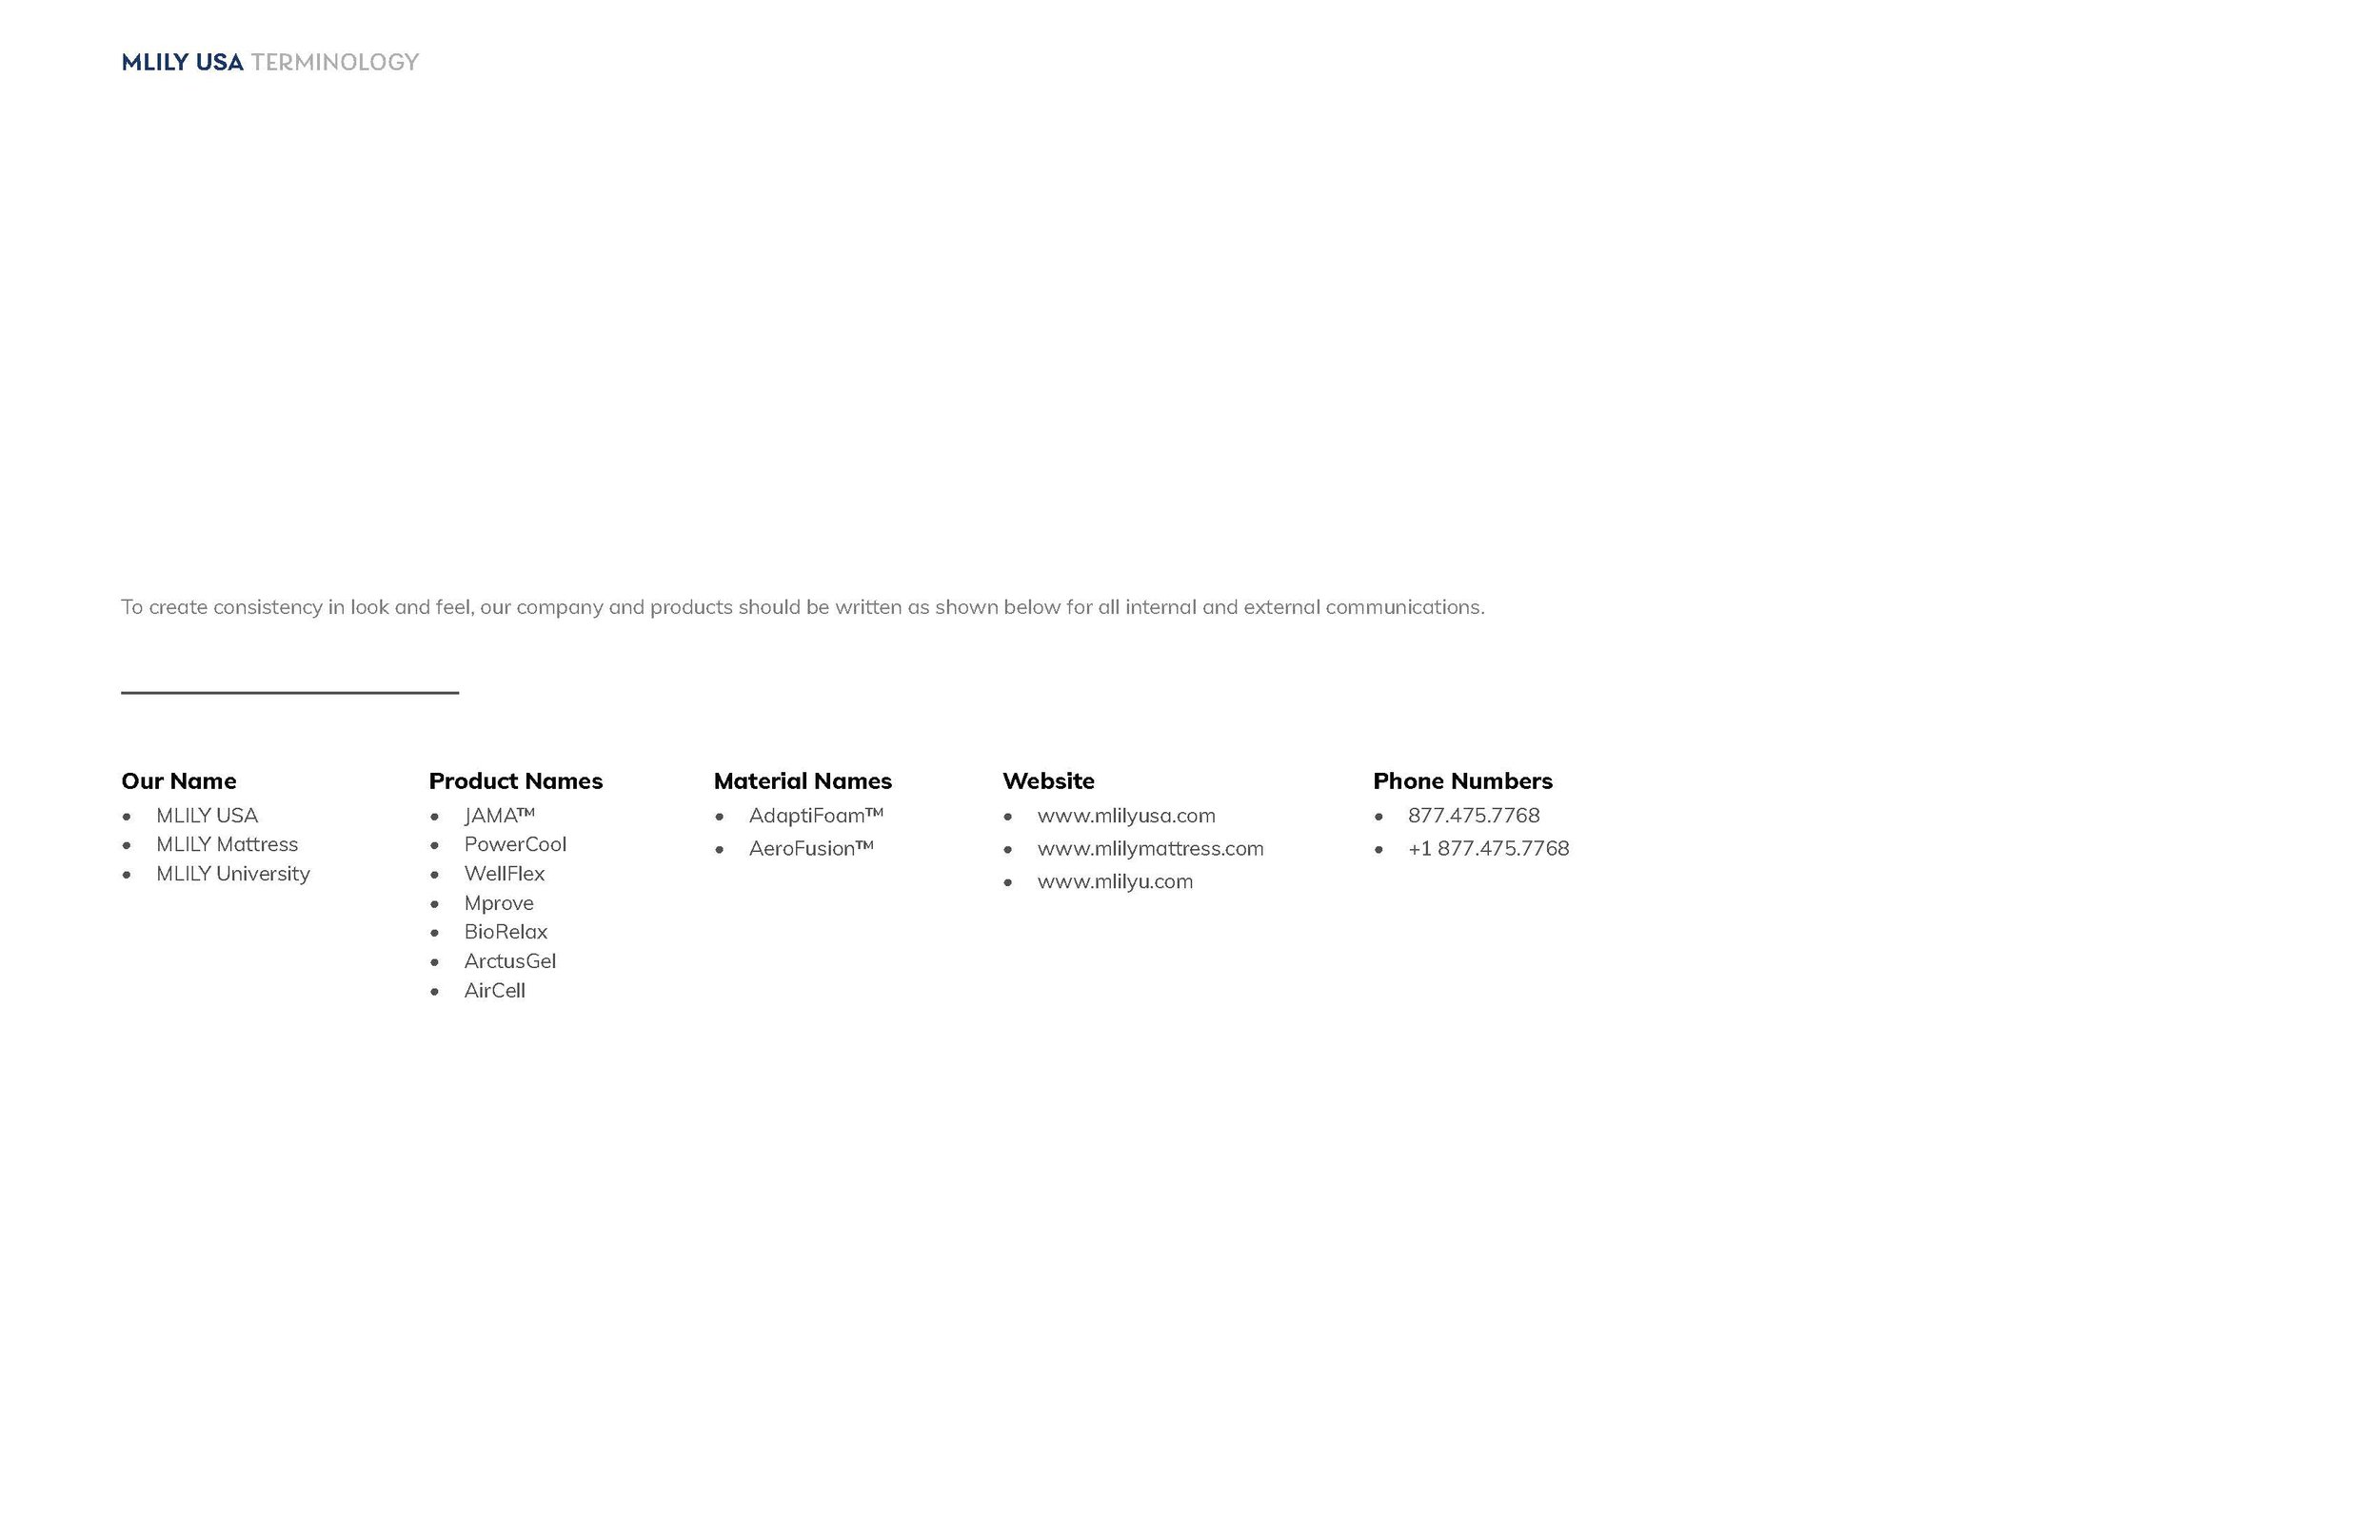 MLILY USA Brand Guidelines - with Pronunciation_Page_08.jpg